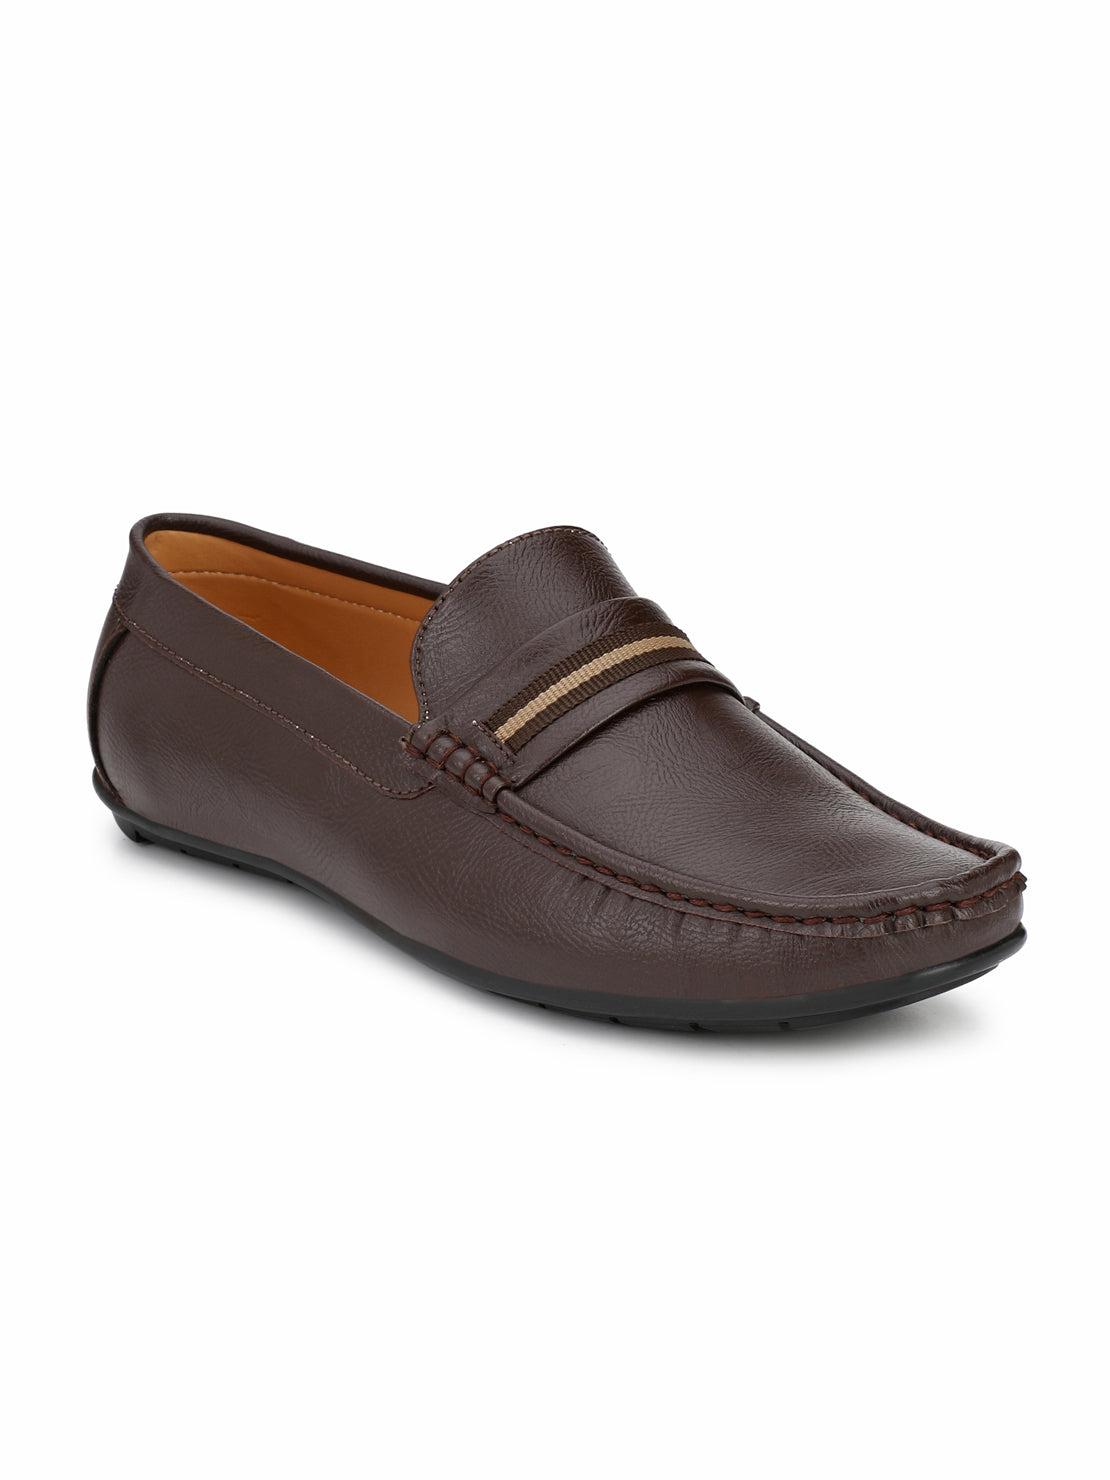 Guava Men's Brown Casual Slip On Driving Loafers (GV15JA570)